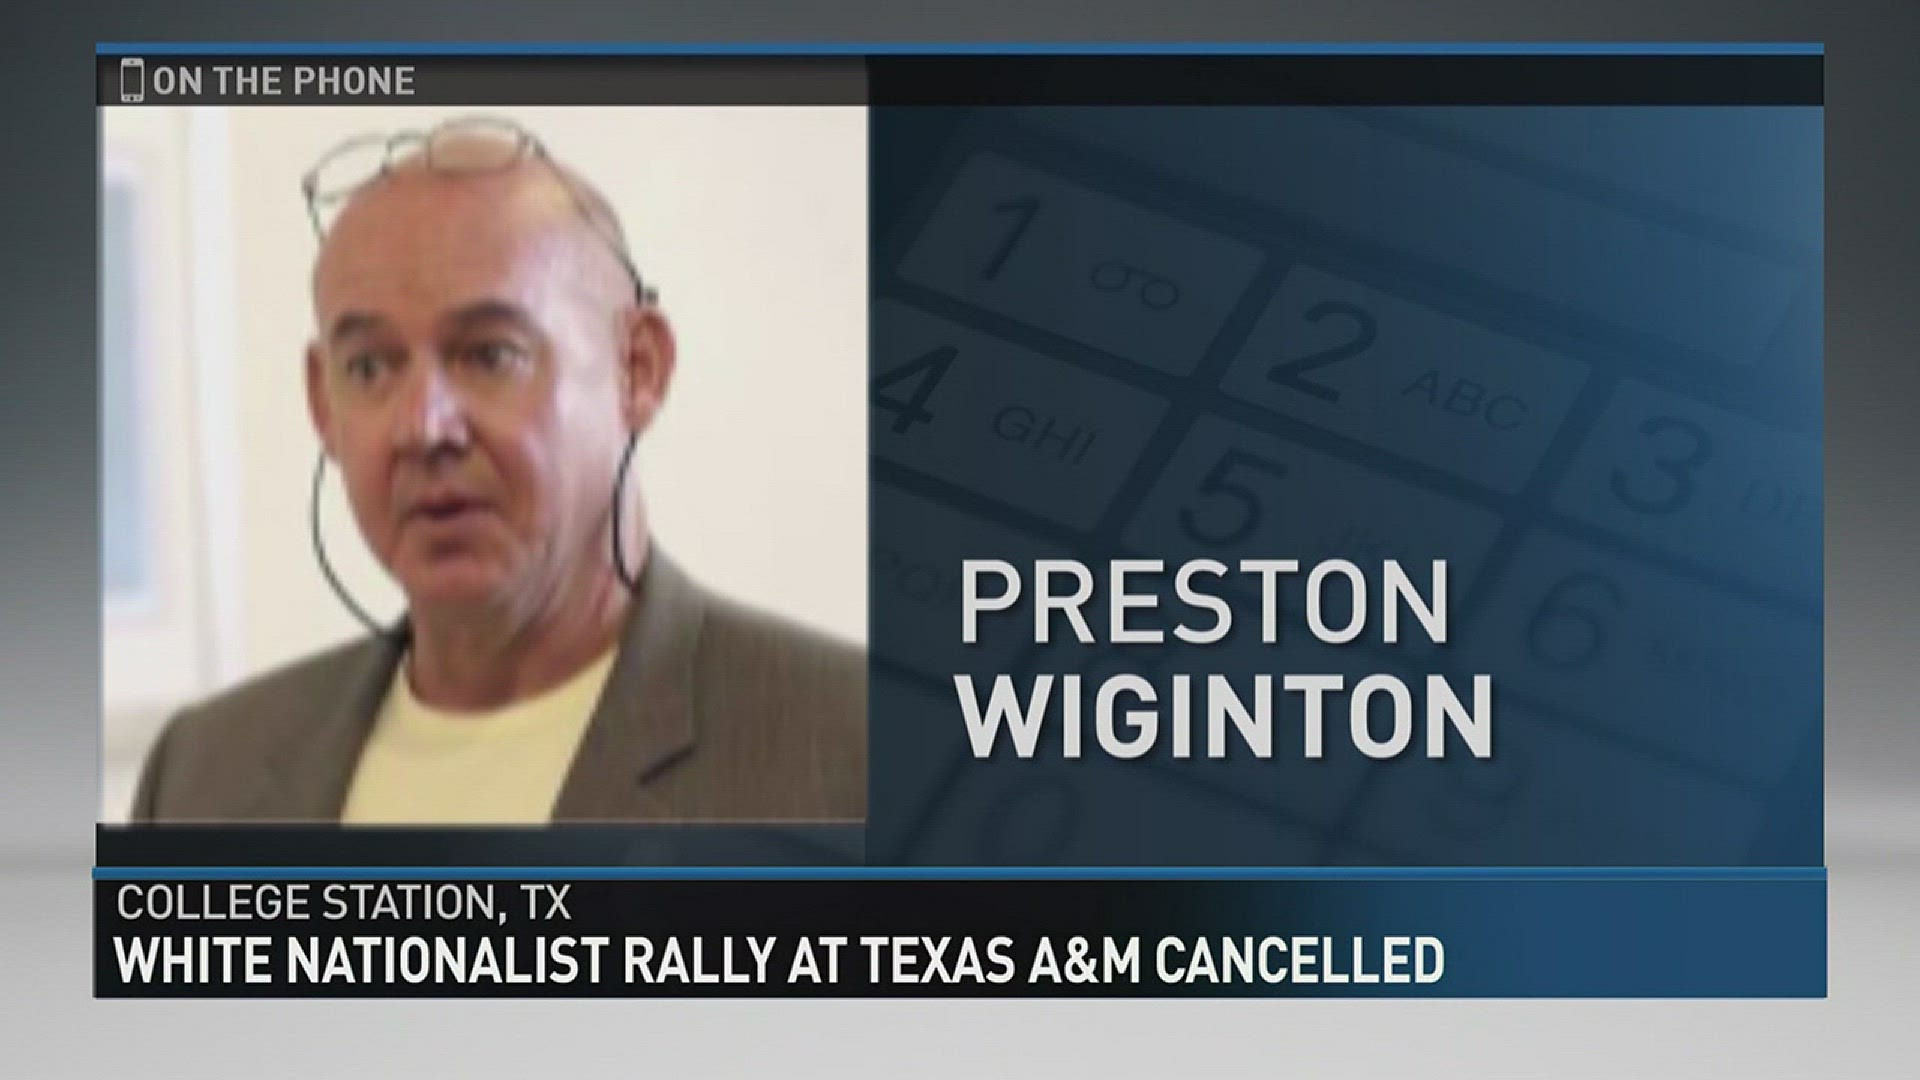 Preston Wiginton organized a white nationalist rally at Texas A&M University only to be deemed unsafe by the school. Wiginton comments on the conflict of freedom of speech.